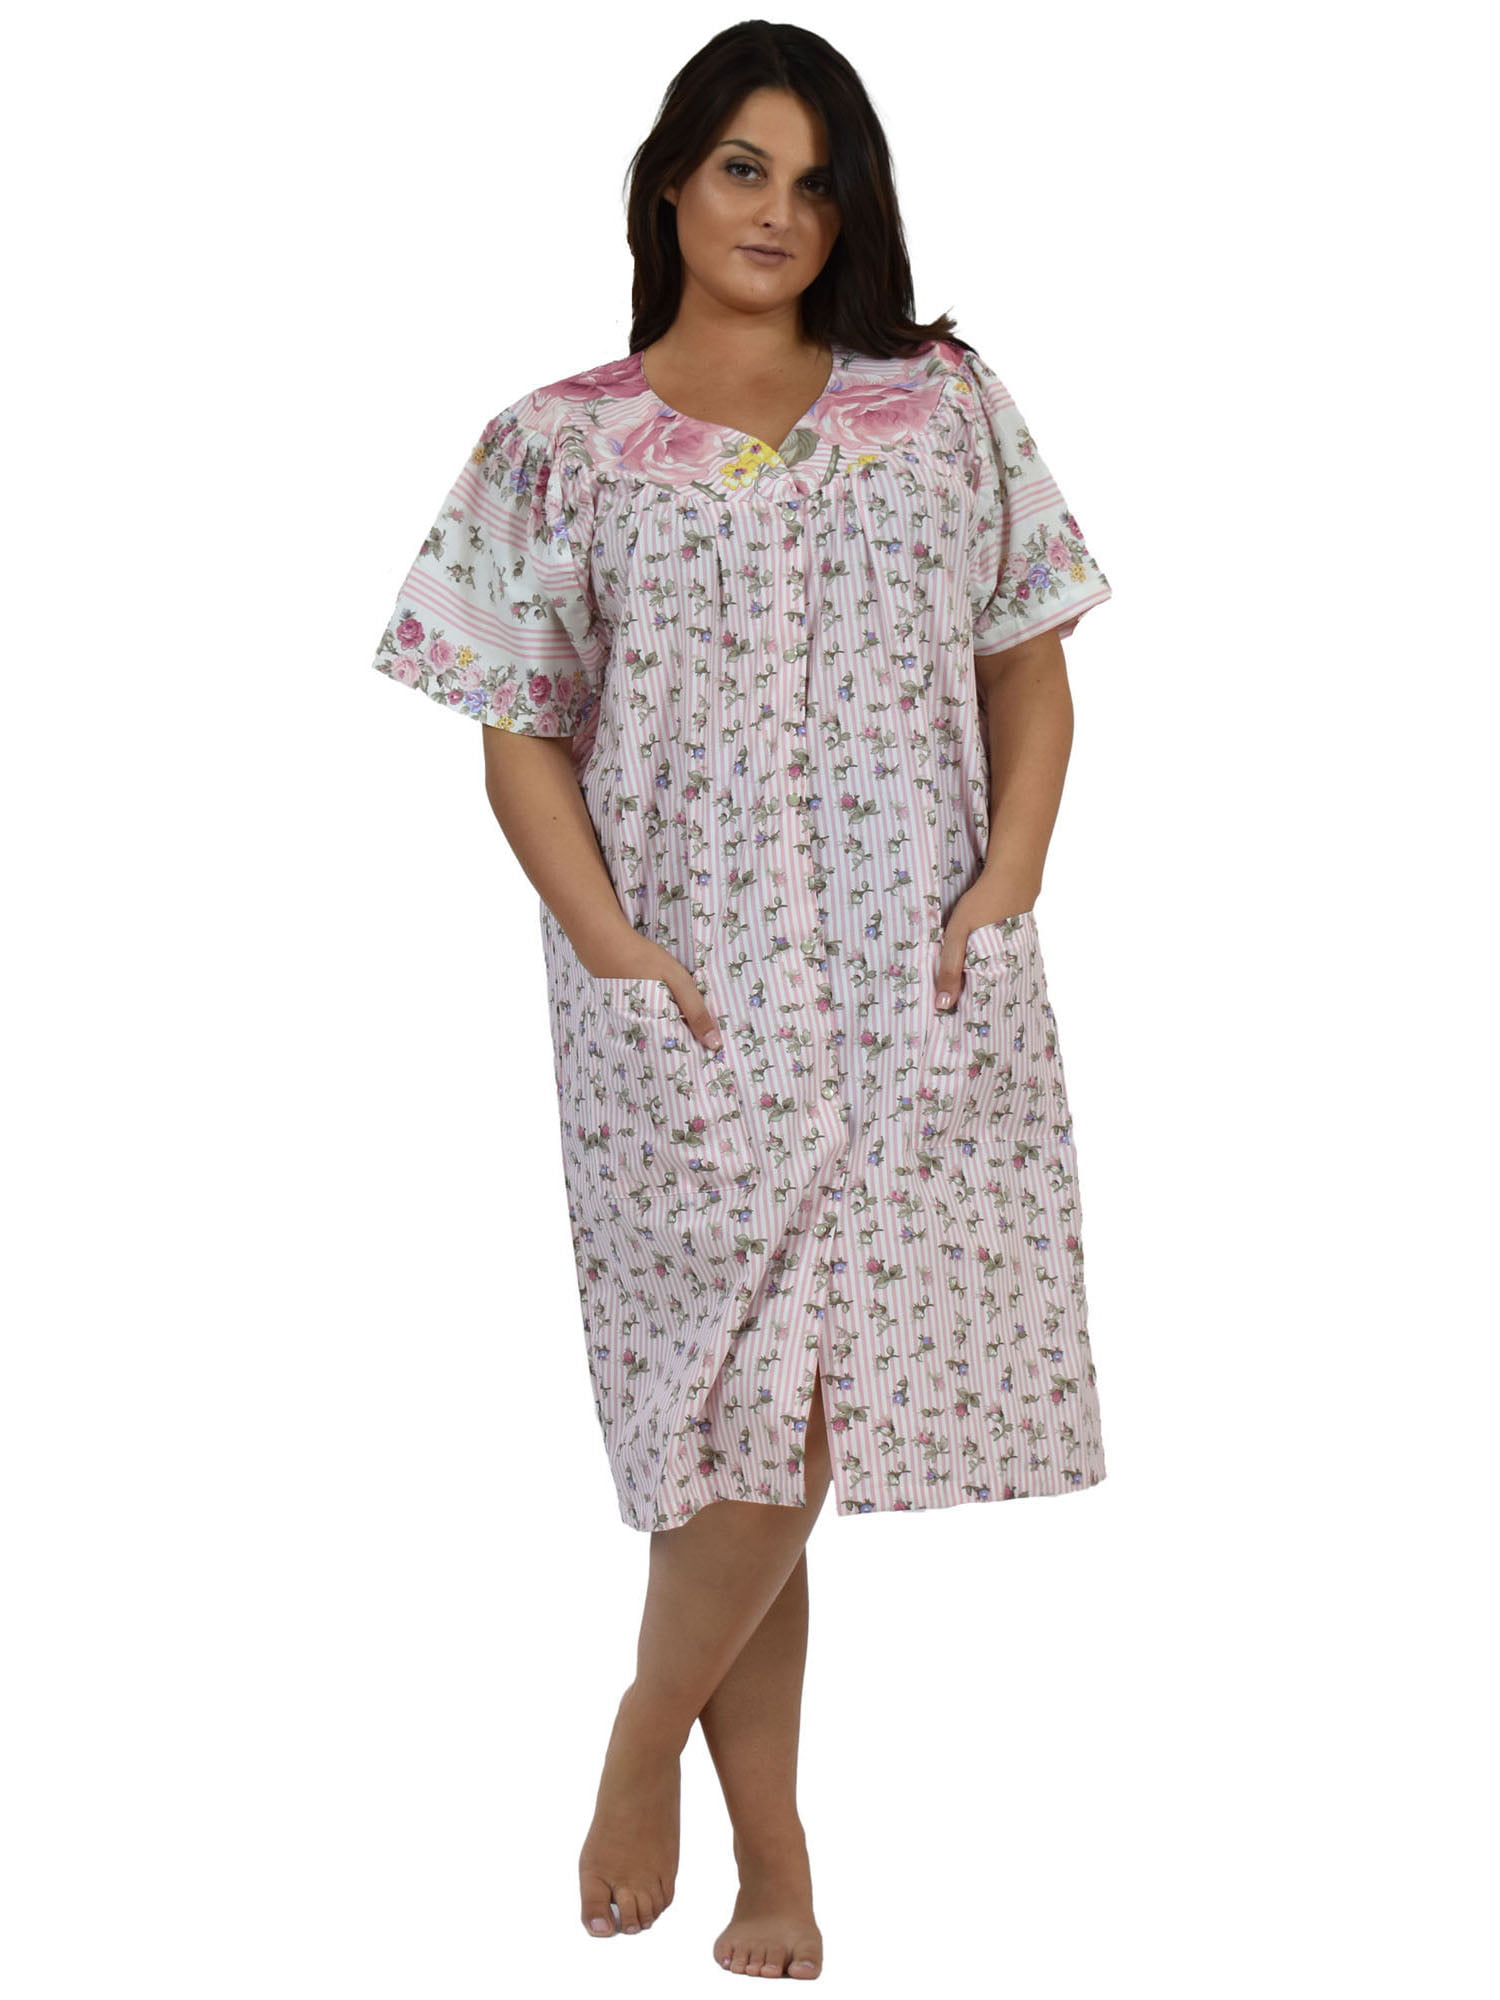 Up2date Fashions Womens 100 Cotton Nightgown House Dress In A Pink Floral Print